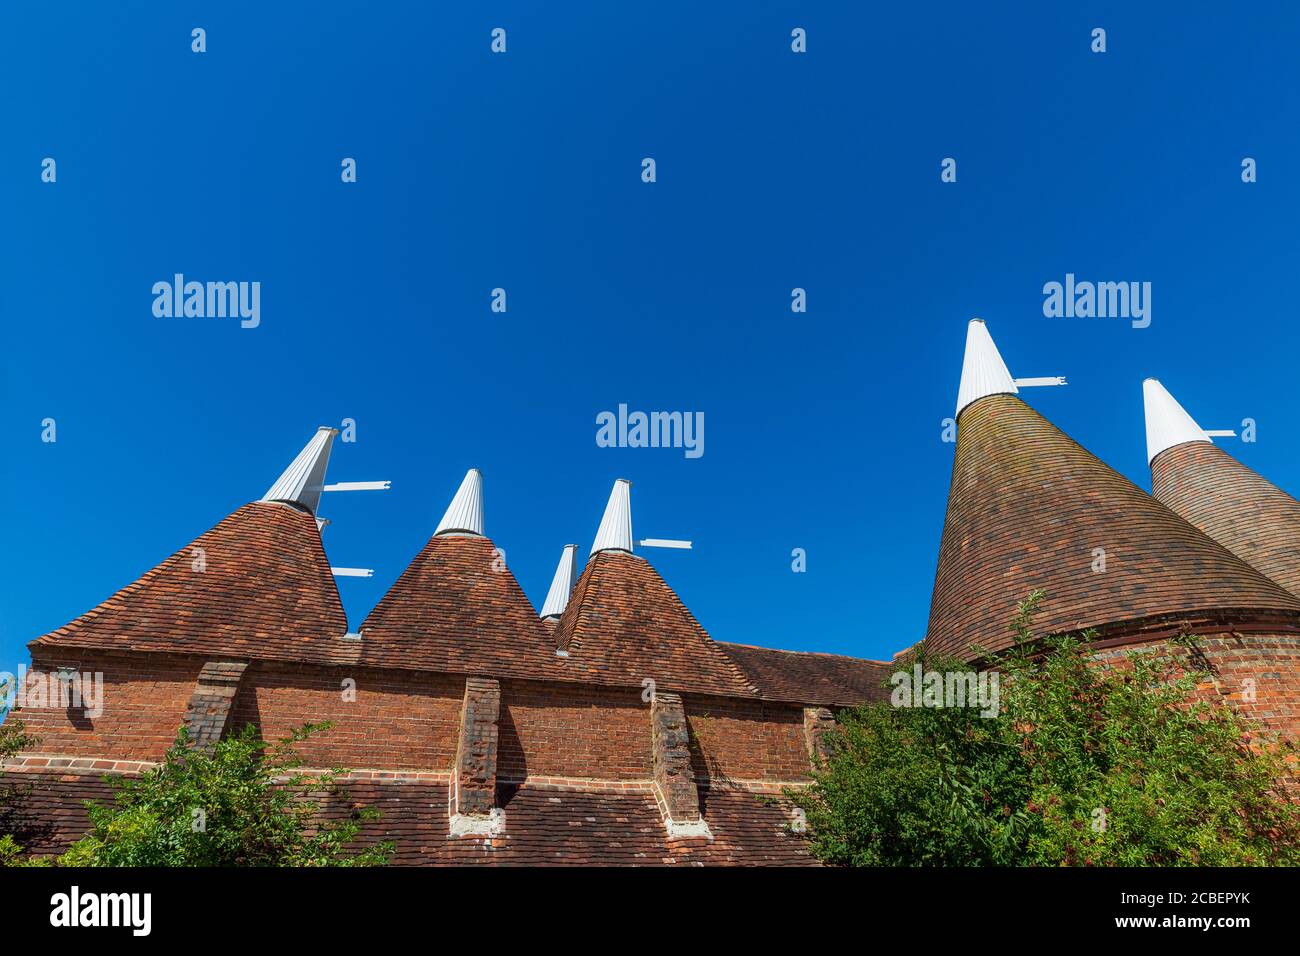 A brick Oast house in the Kent countryside, England Stock Photo